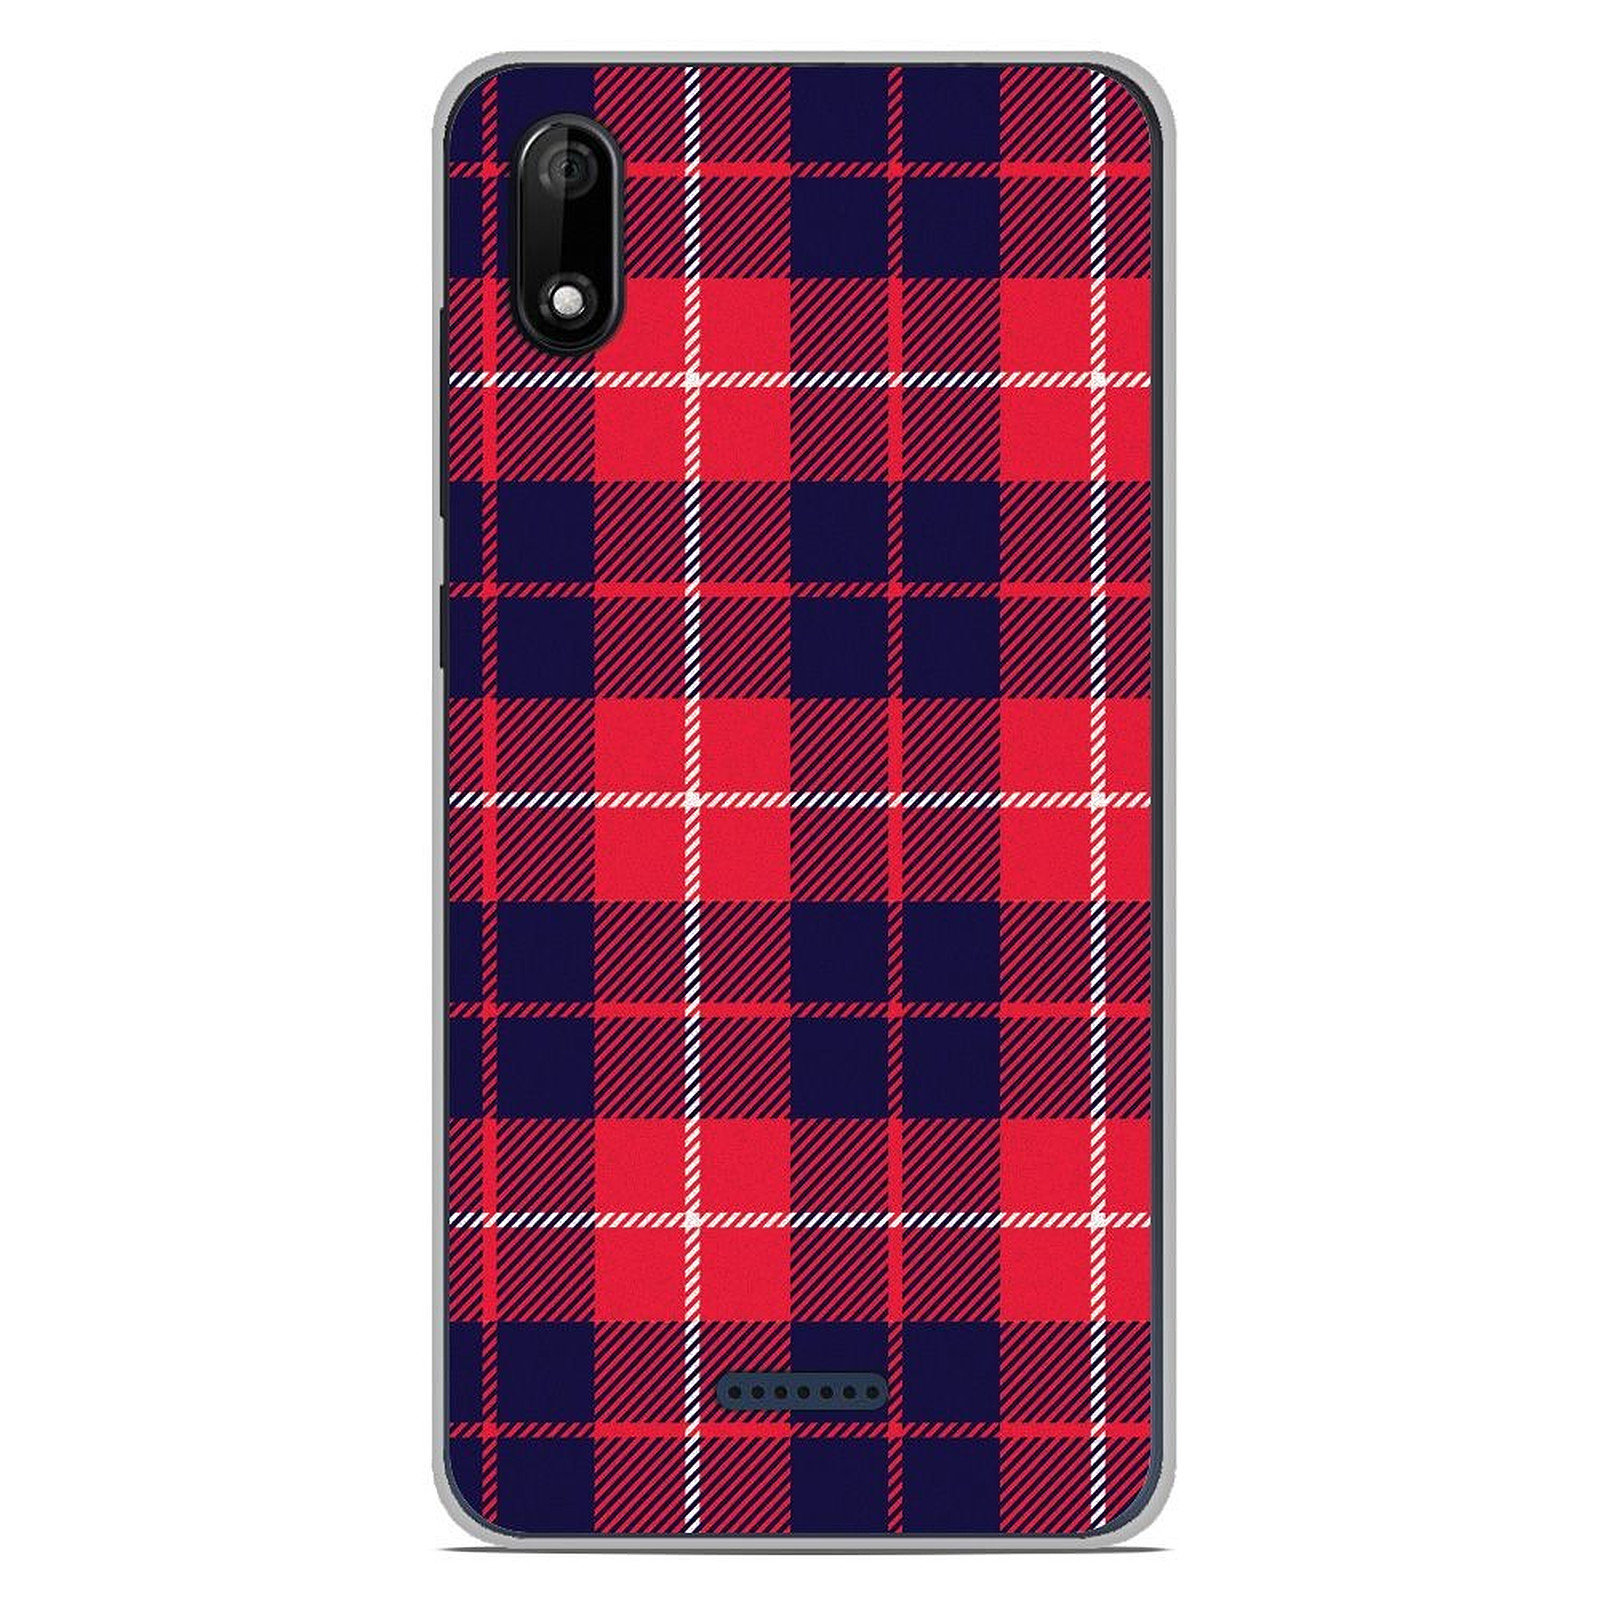 1001 Coques Coque silicone gel Wiko Y60 motif Tartan Rouge 2 - Coque telephone 1001Coques